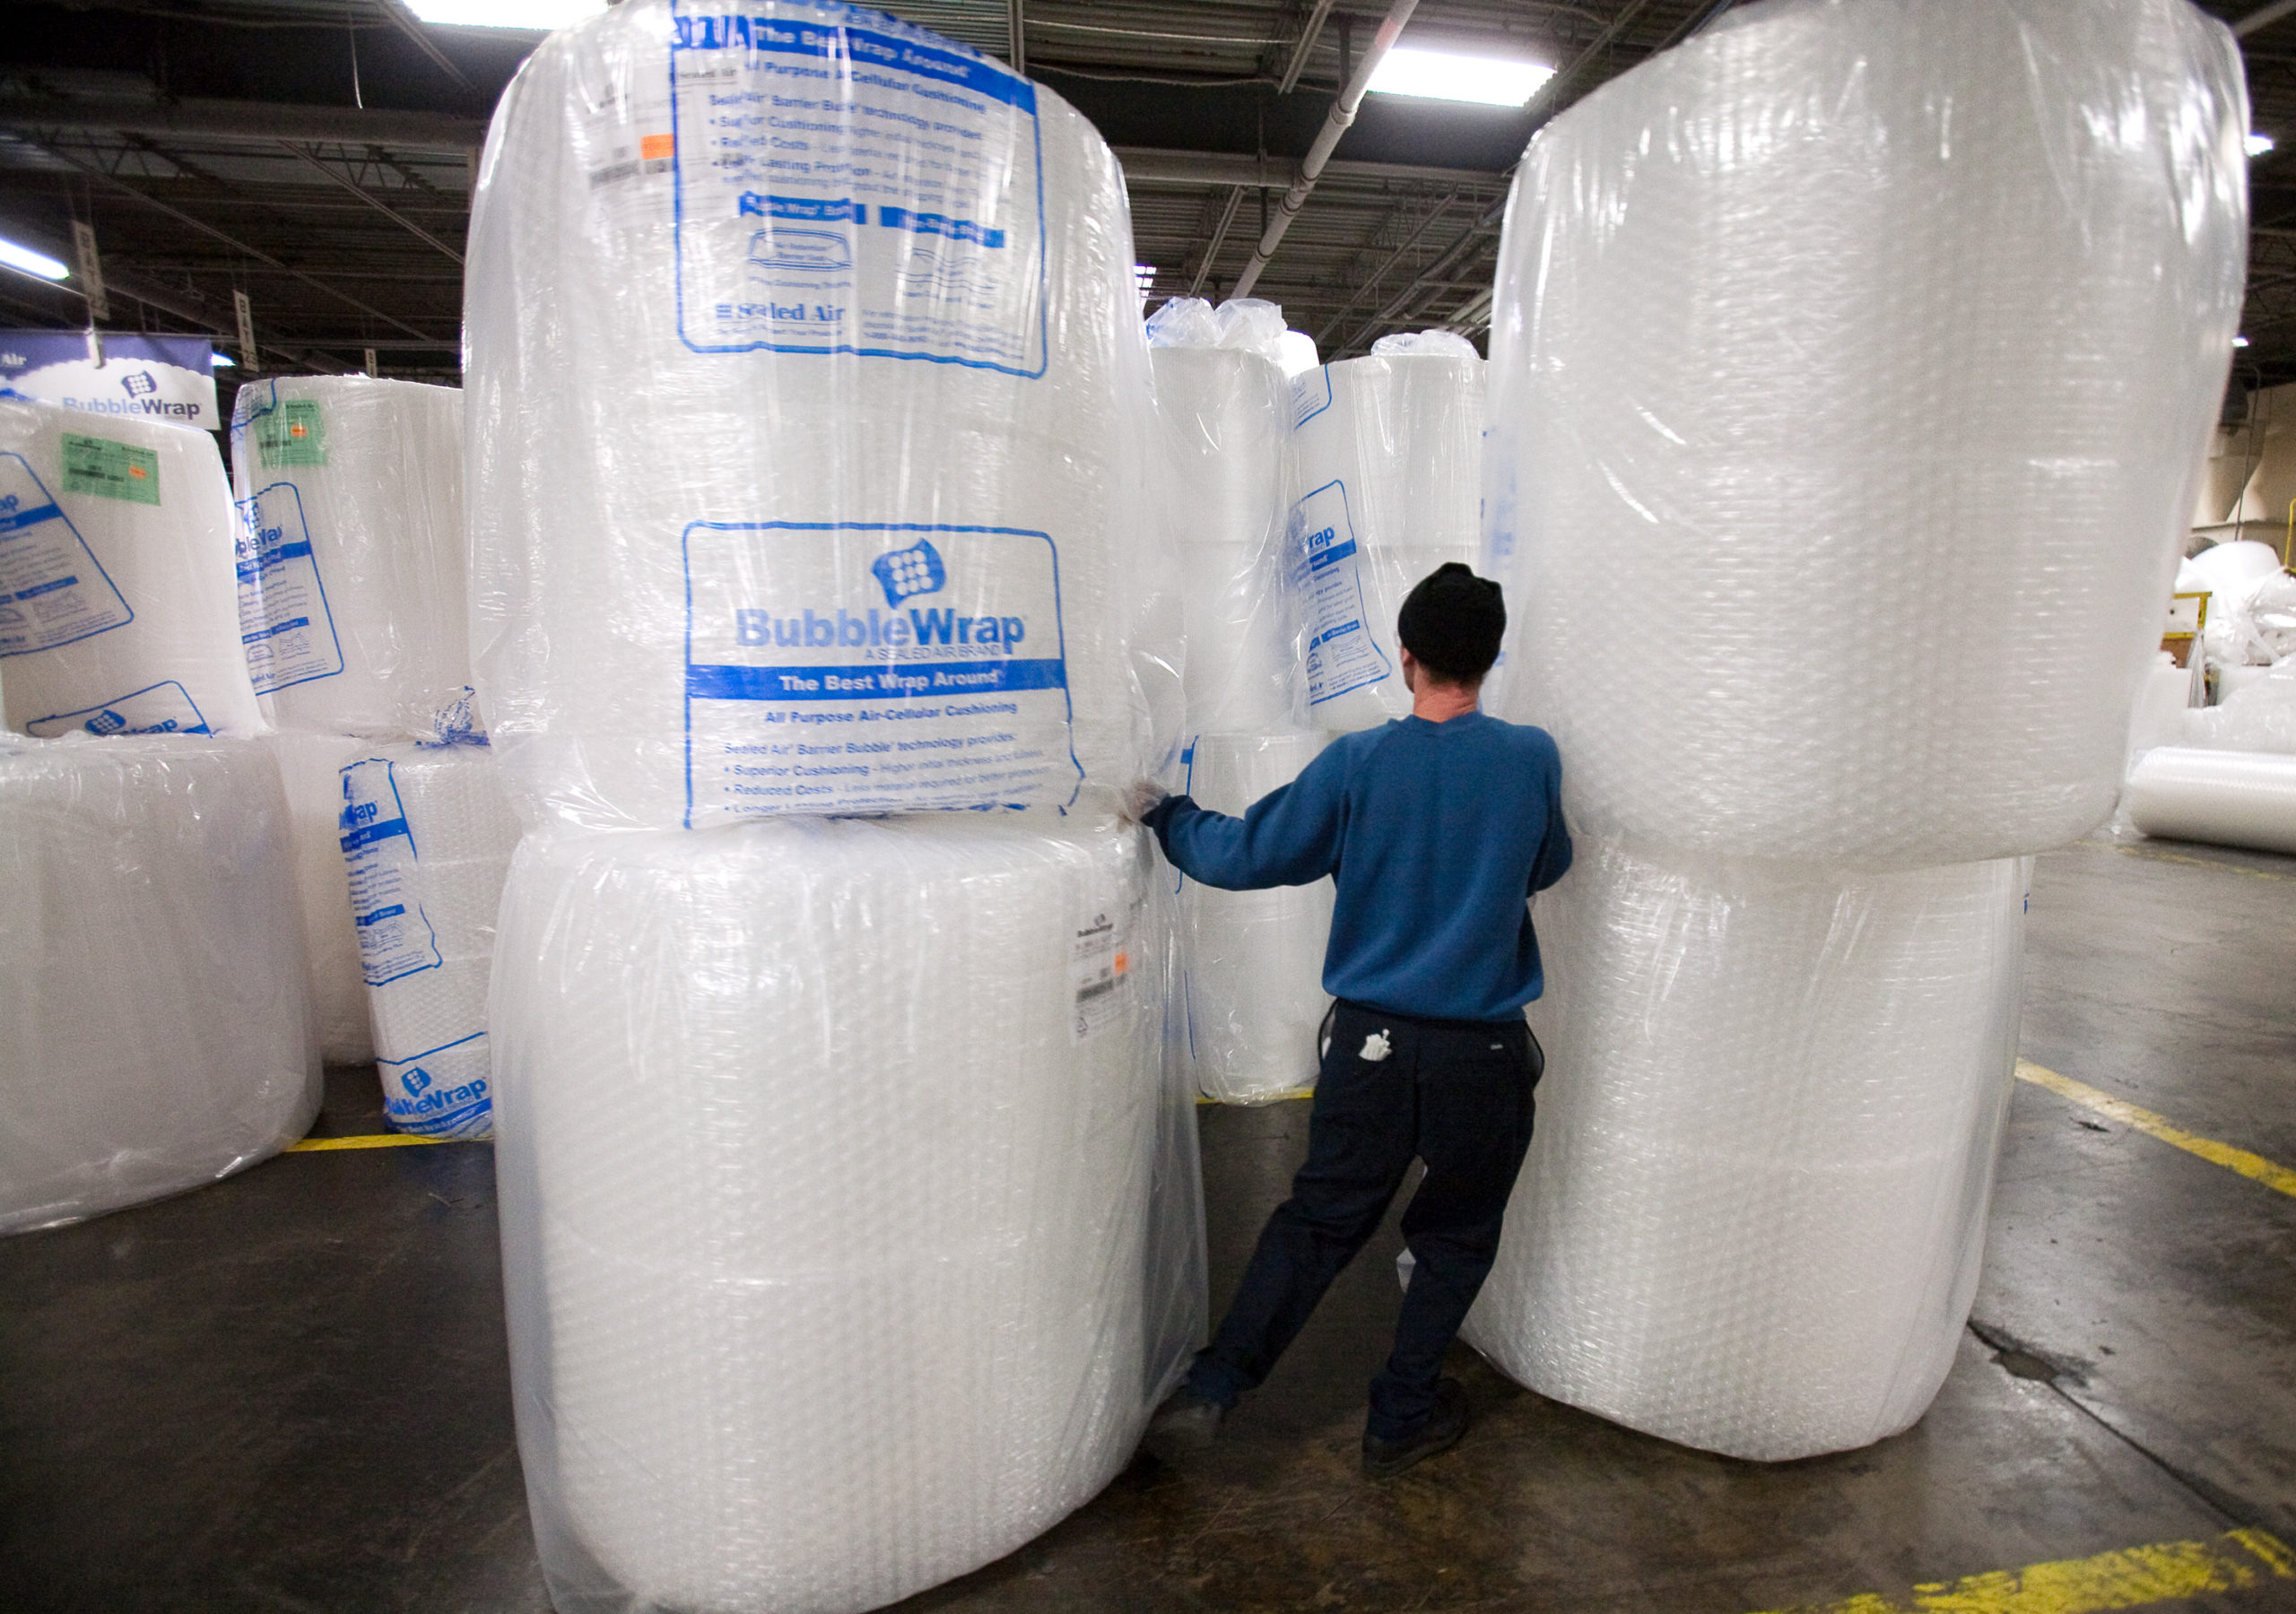 Bubble Wrap’s New Design Is Unpoppable, And It’s All Our Fault